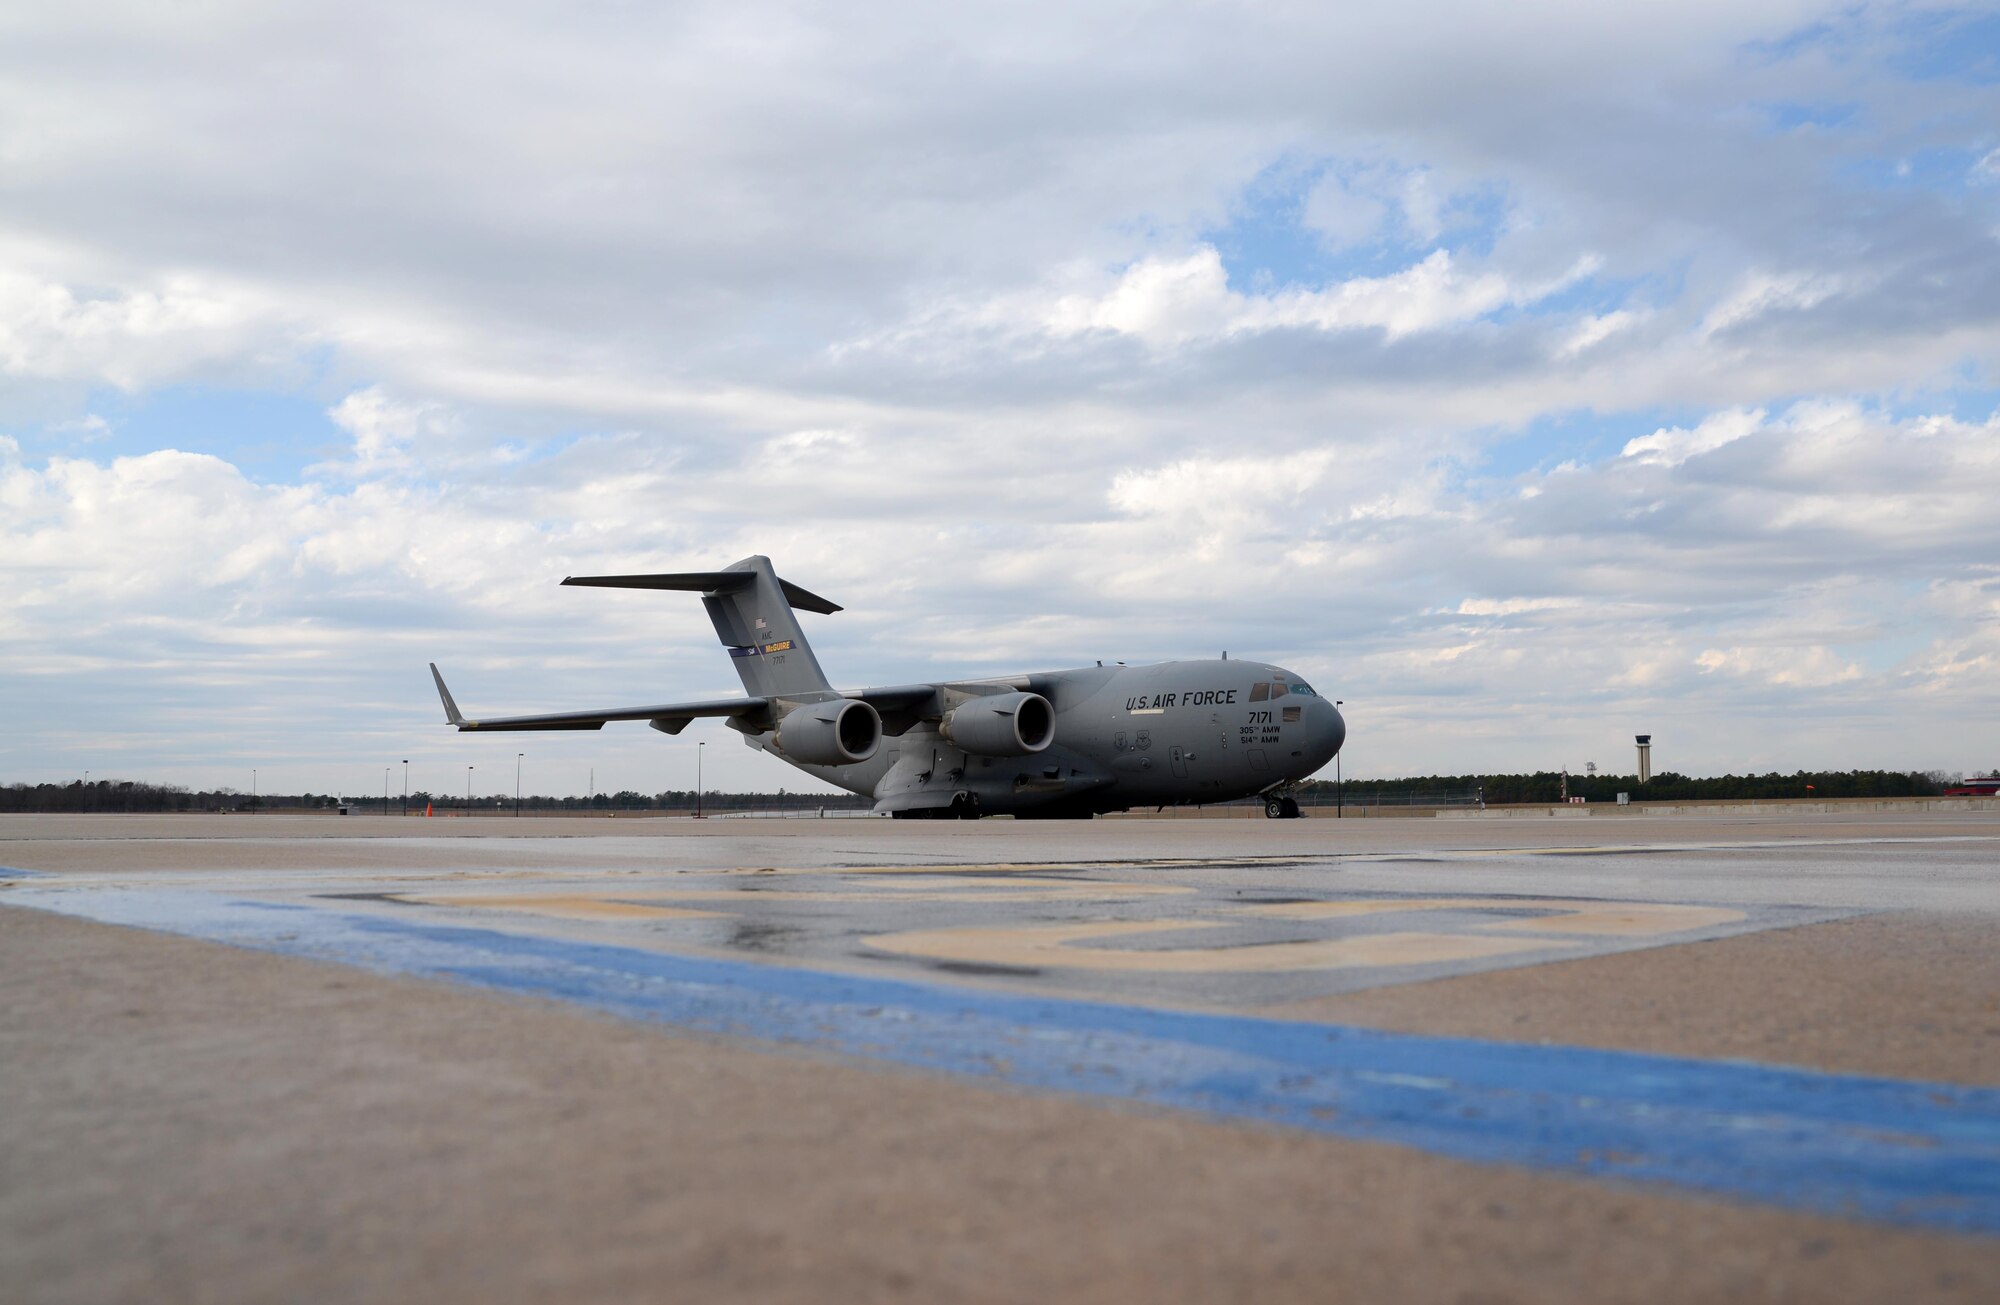 A picture of a U.S. Air Force C-17 Globemaster III from Joint Base McGuire-Dix-Lakehurst, N.J. preparing for takeoff.